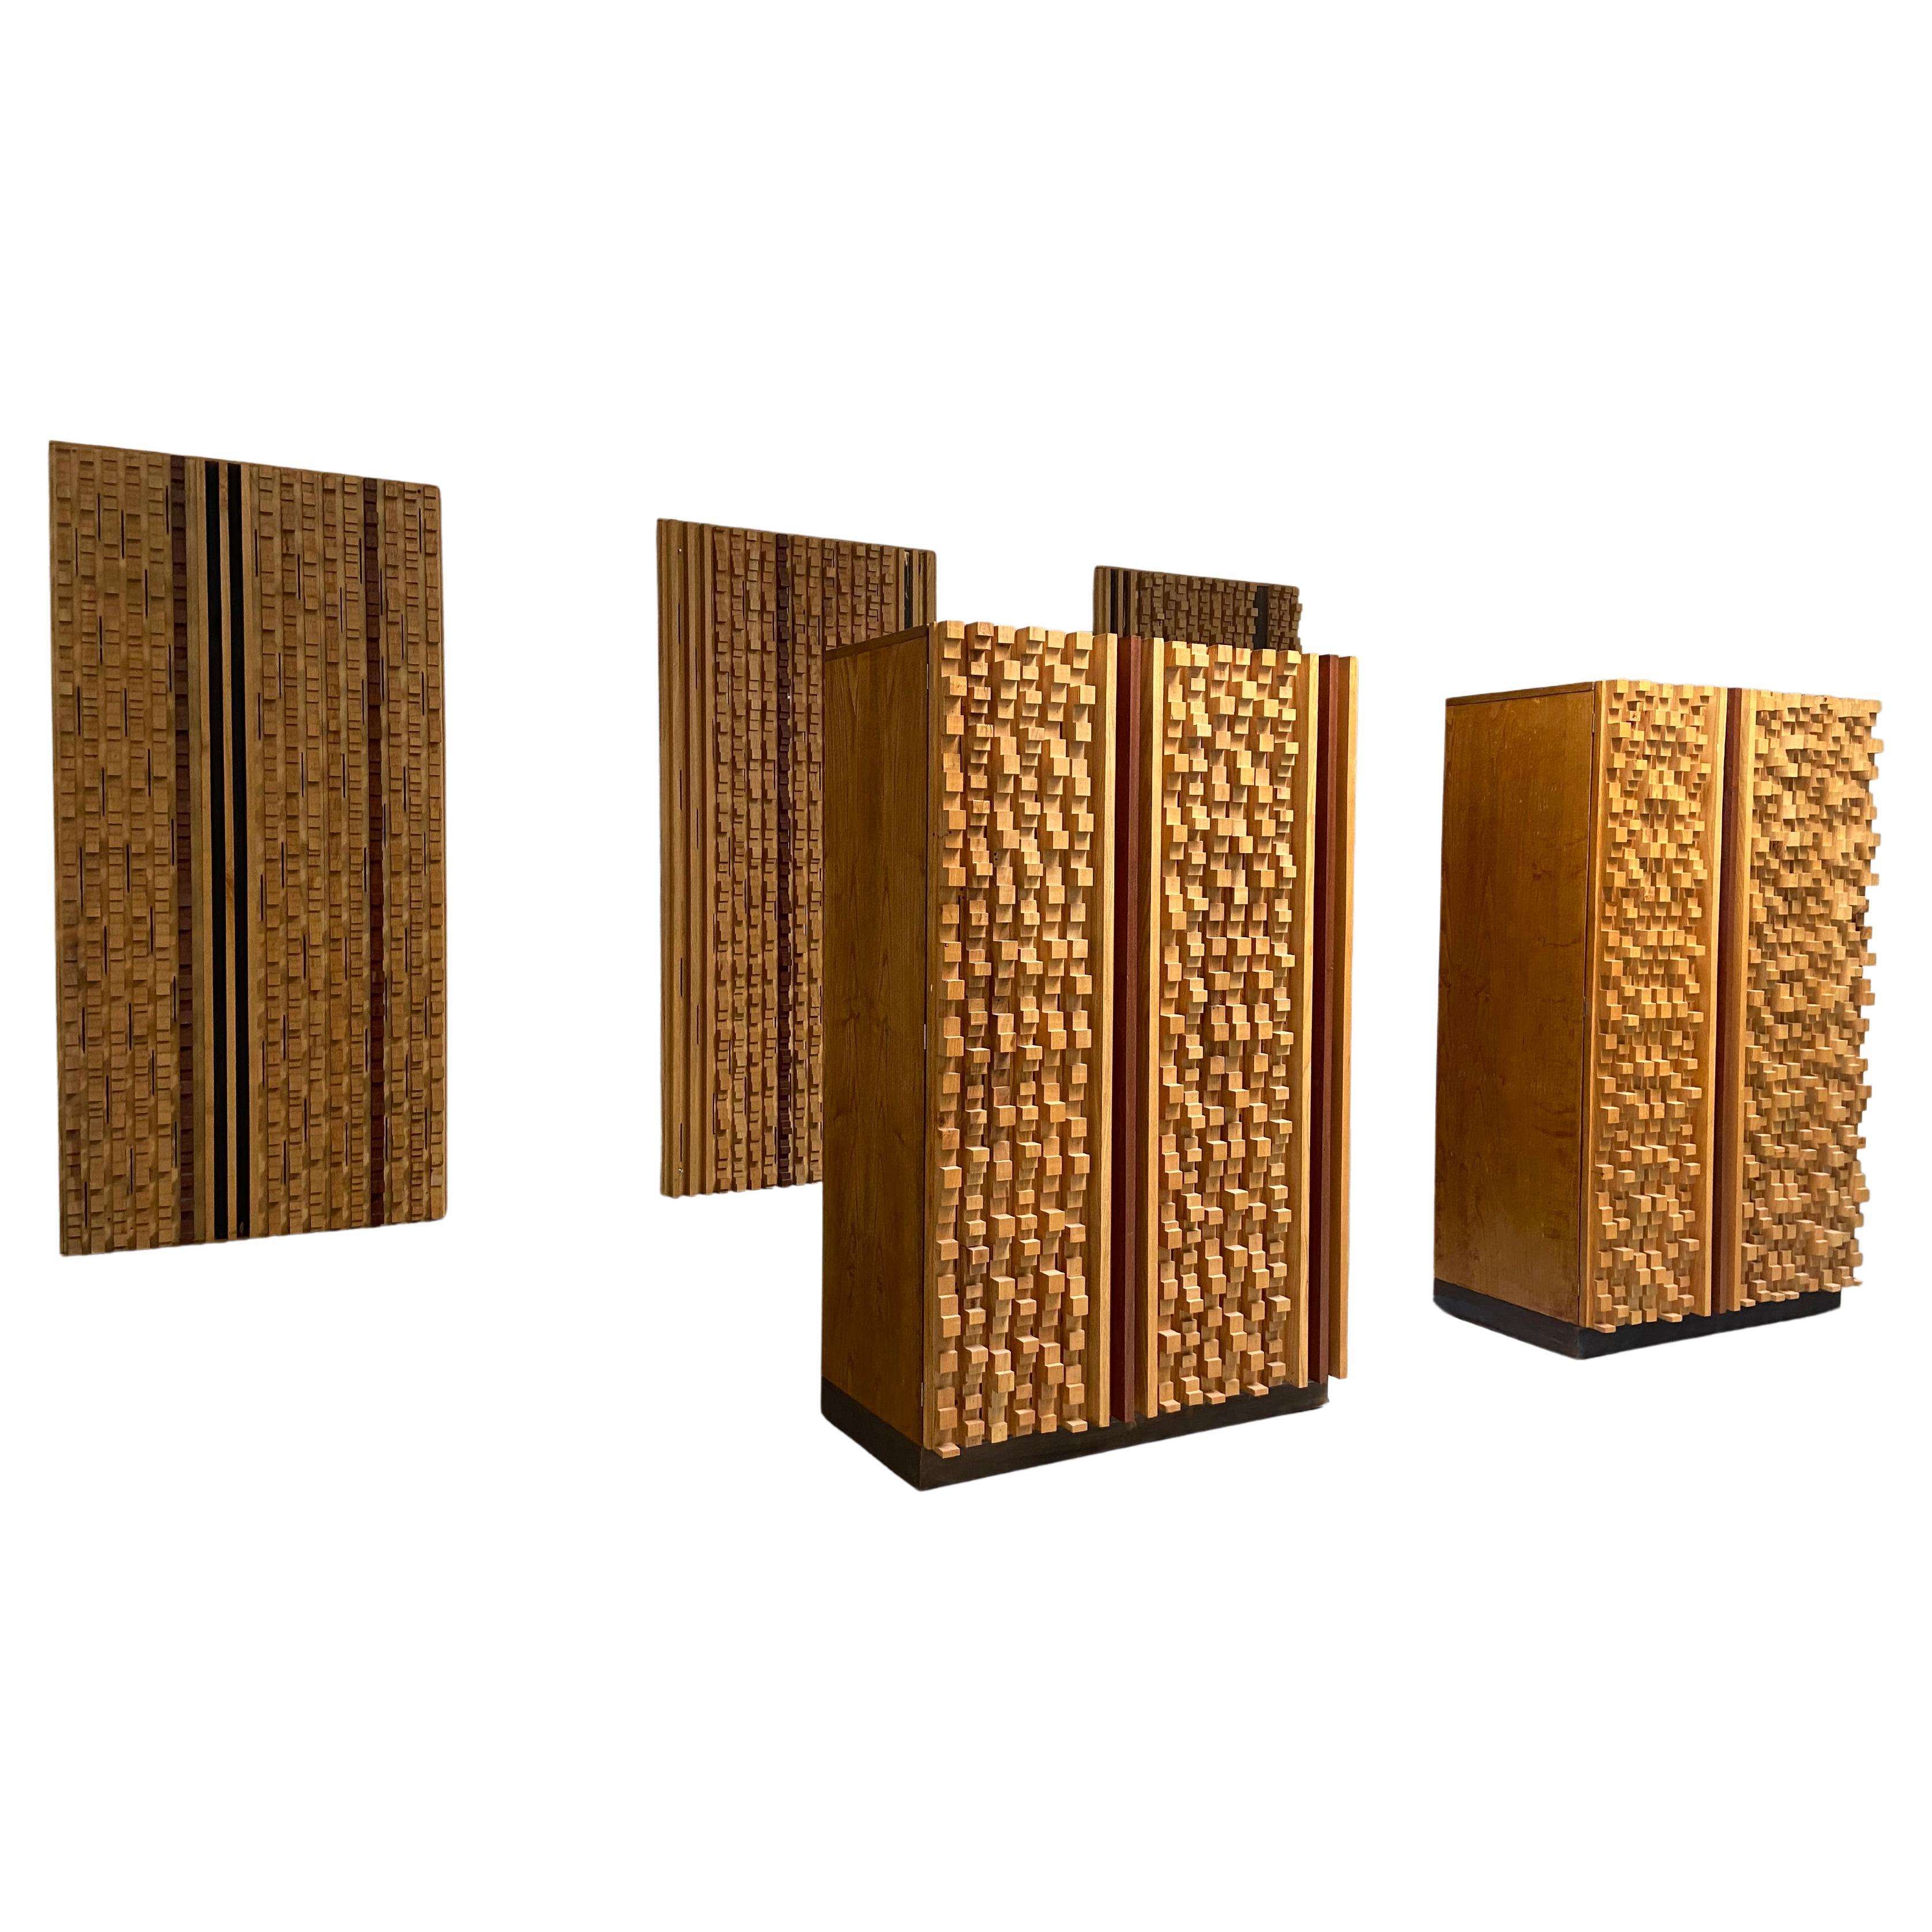 Set of 2 Cabinets and 3 Wall Panels by Stefano d'Amico, Italy, 1974 For Sale